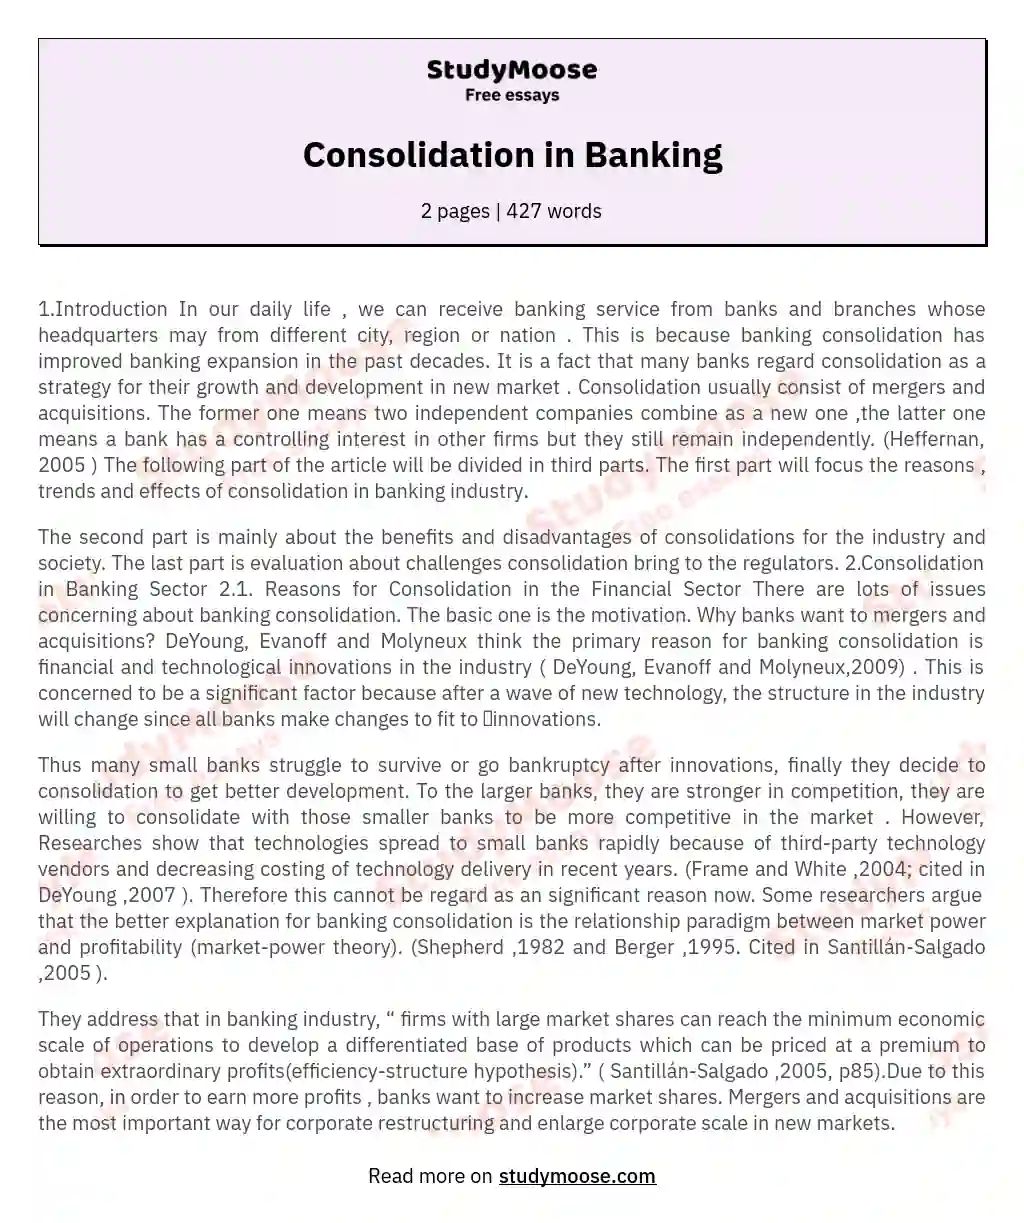 Consolidation in Banking essay